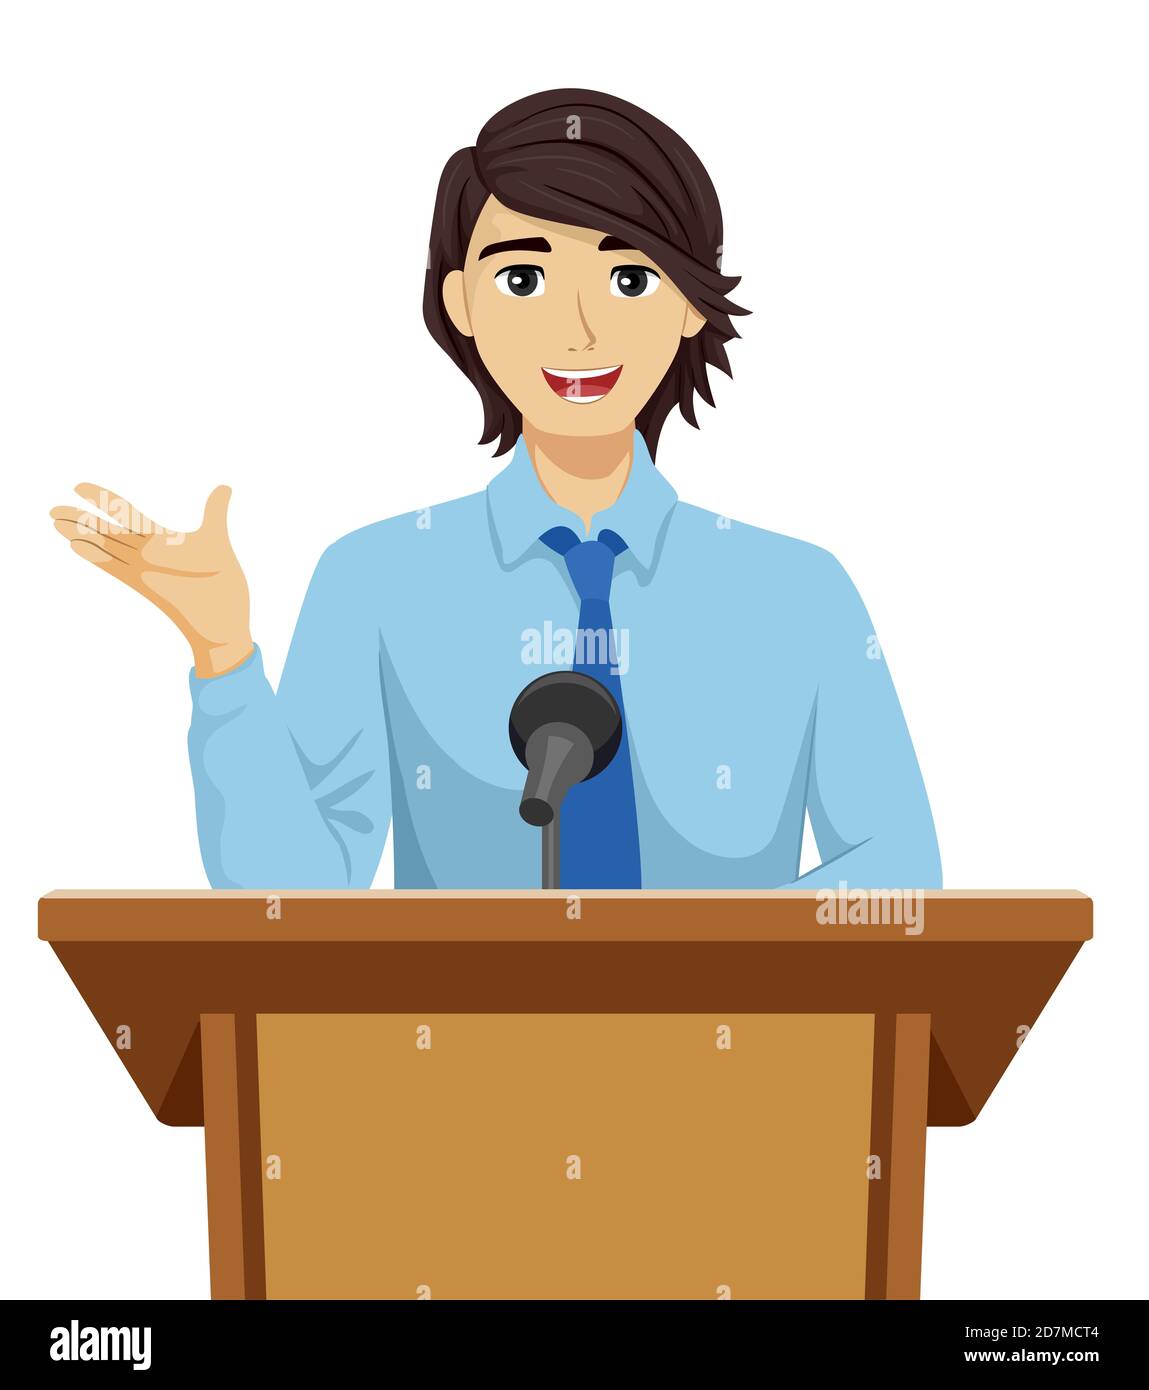 Illustration of a Teenage Guy Giving Speech on Lectern Stock Photo